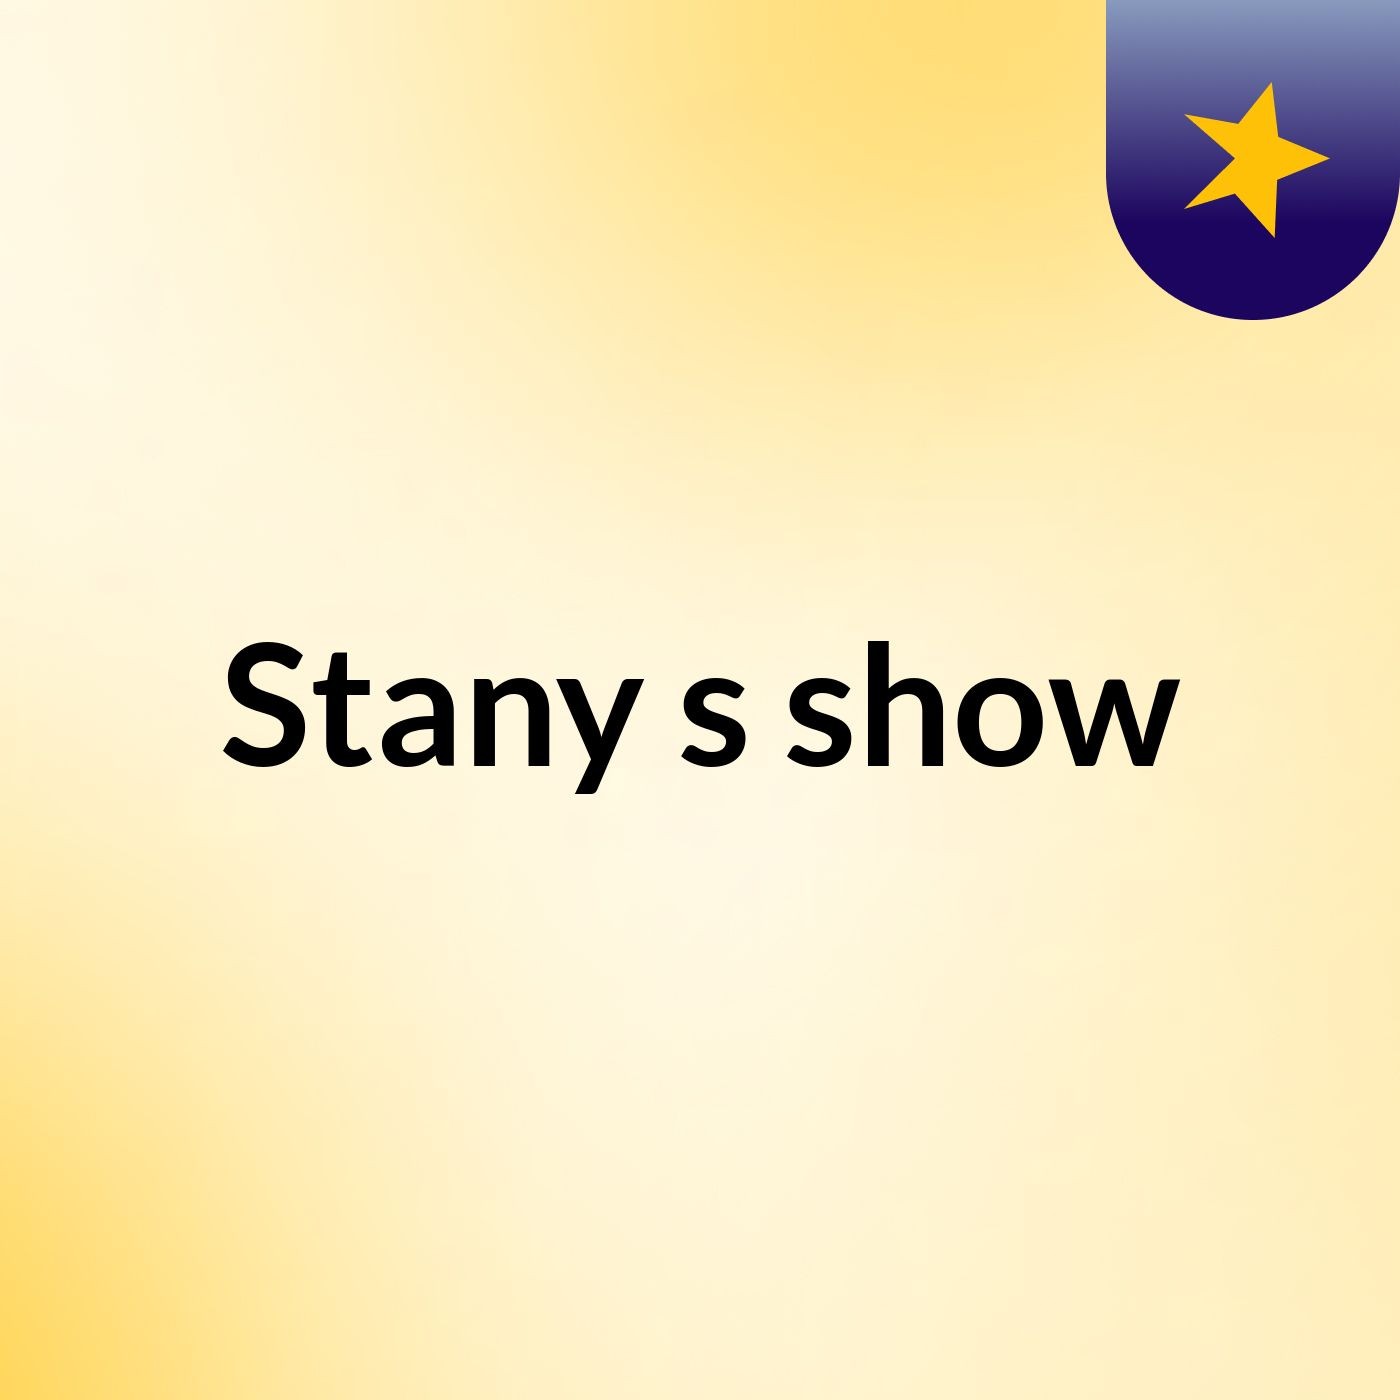 Stany's show